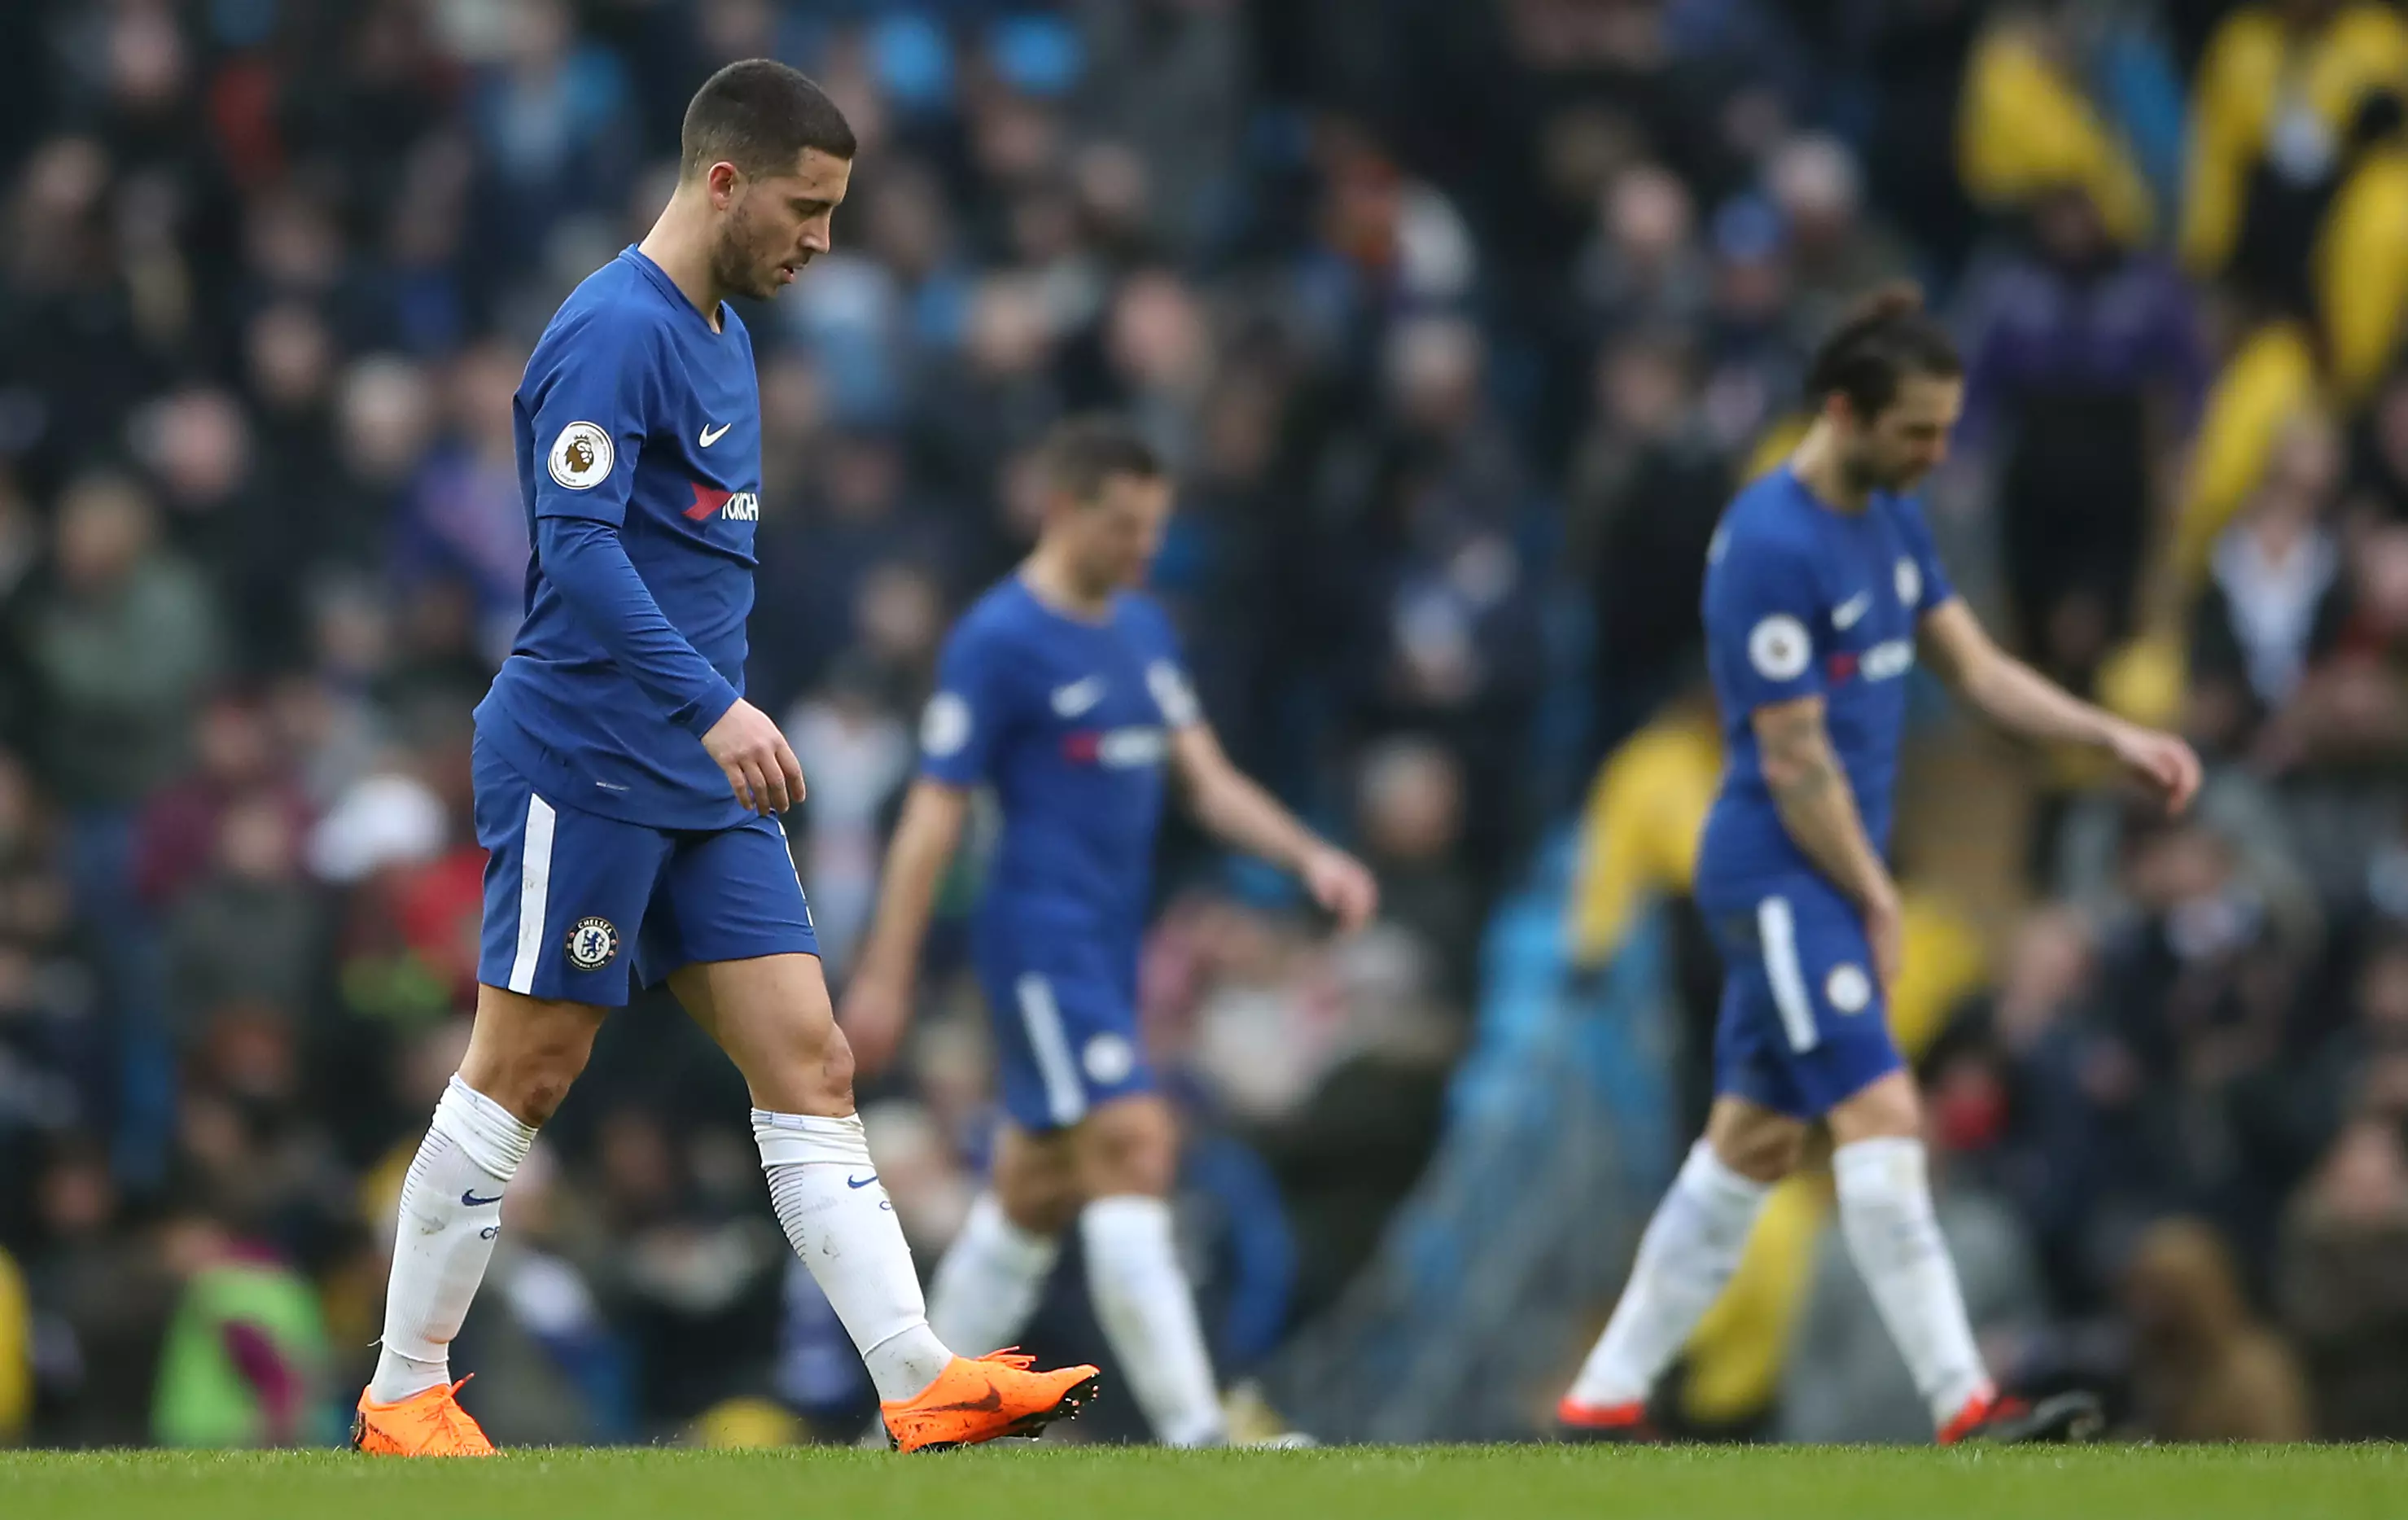 Chelsea players cut a dejected figure. Image: PA